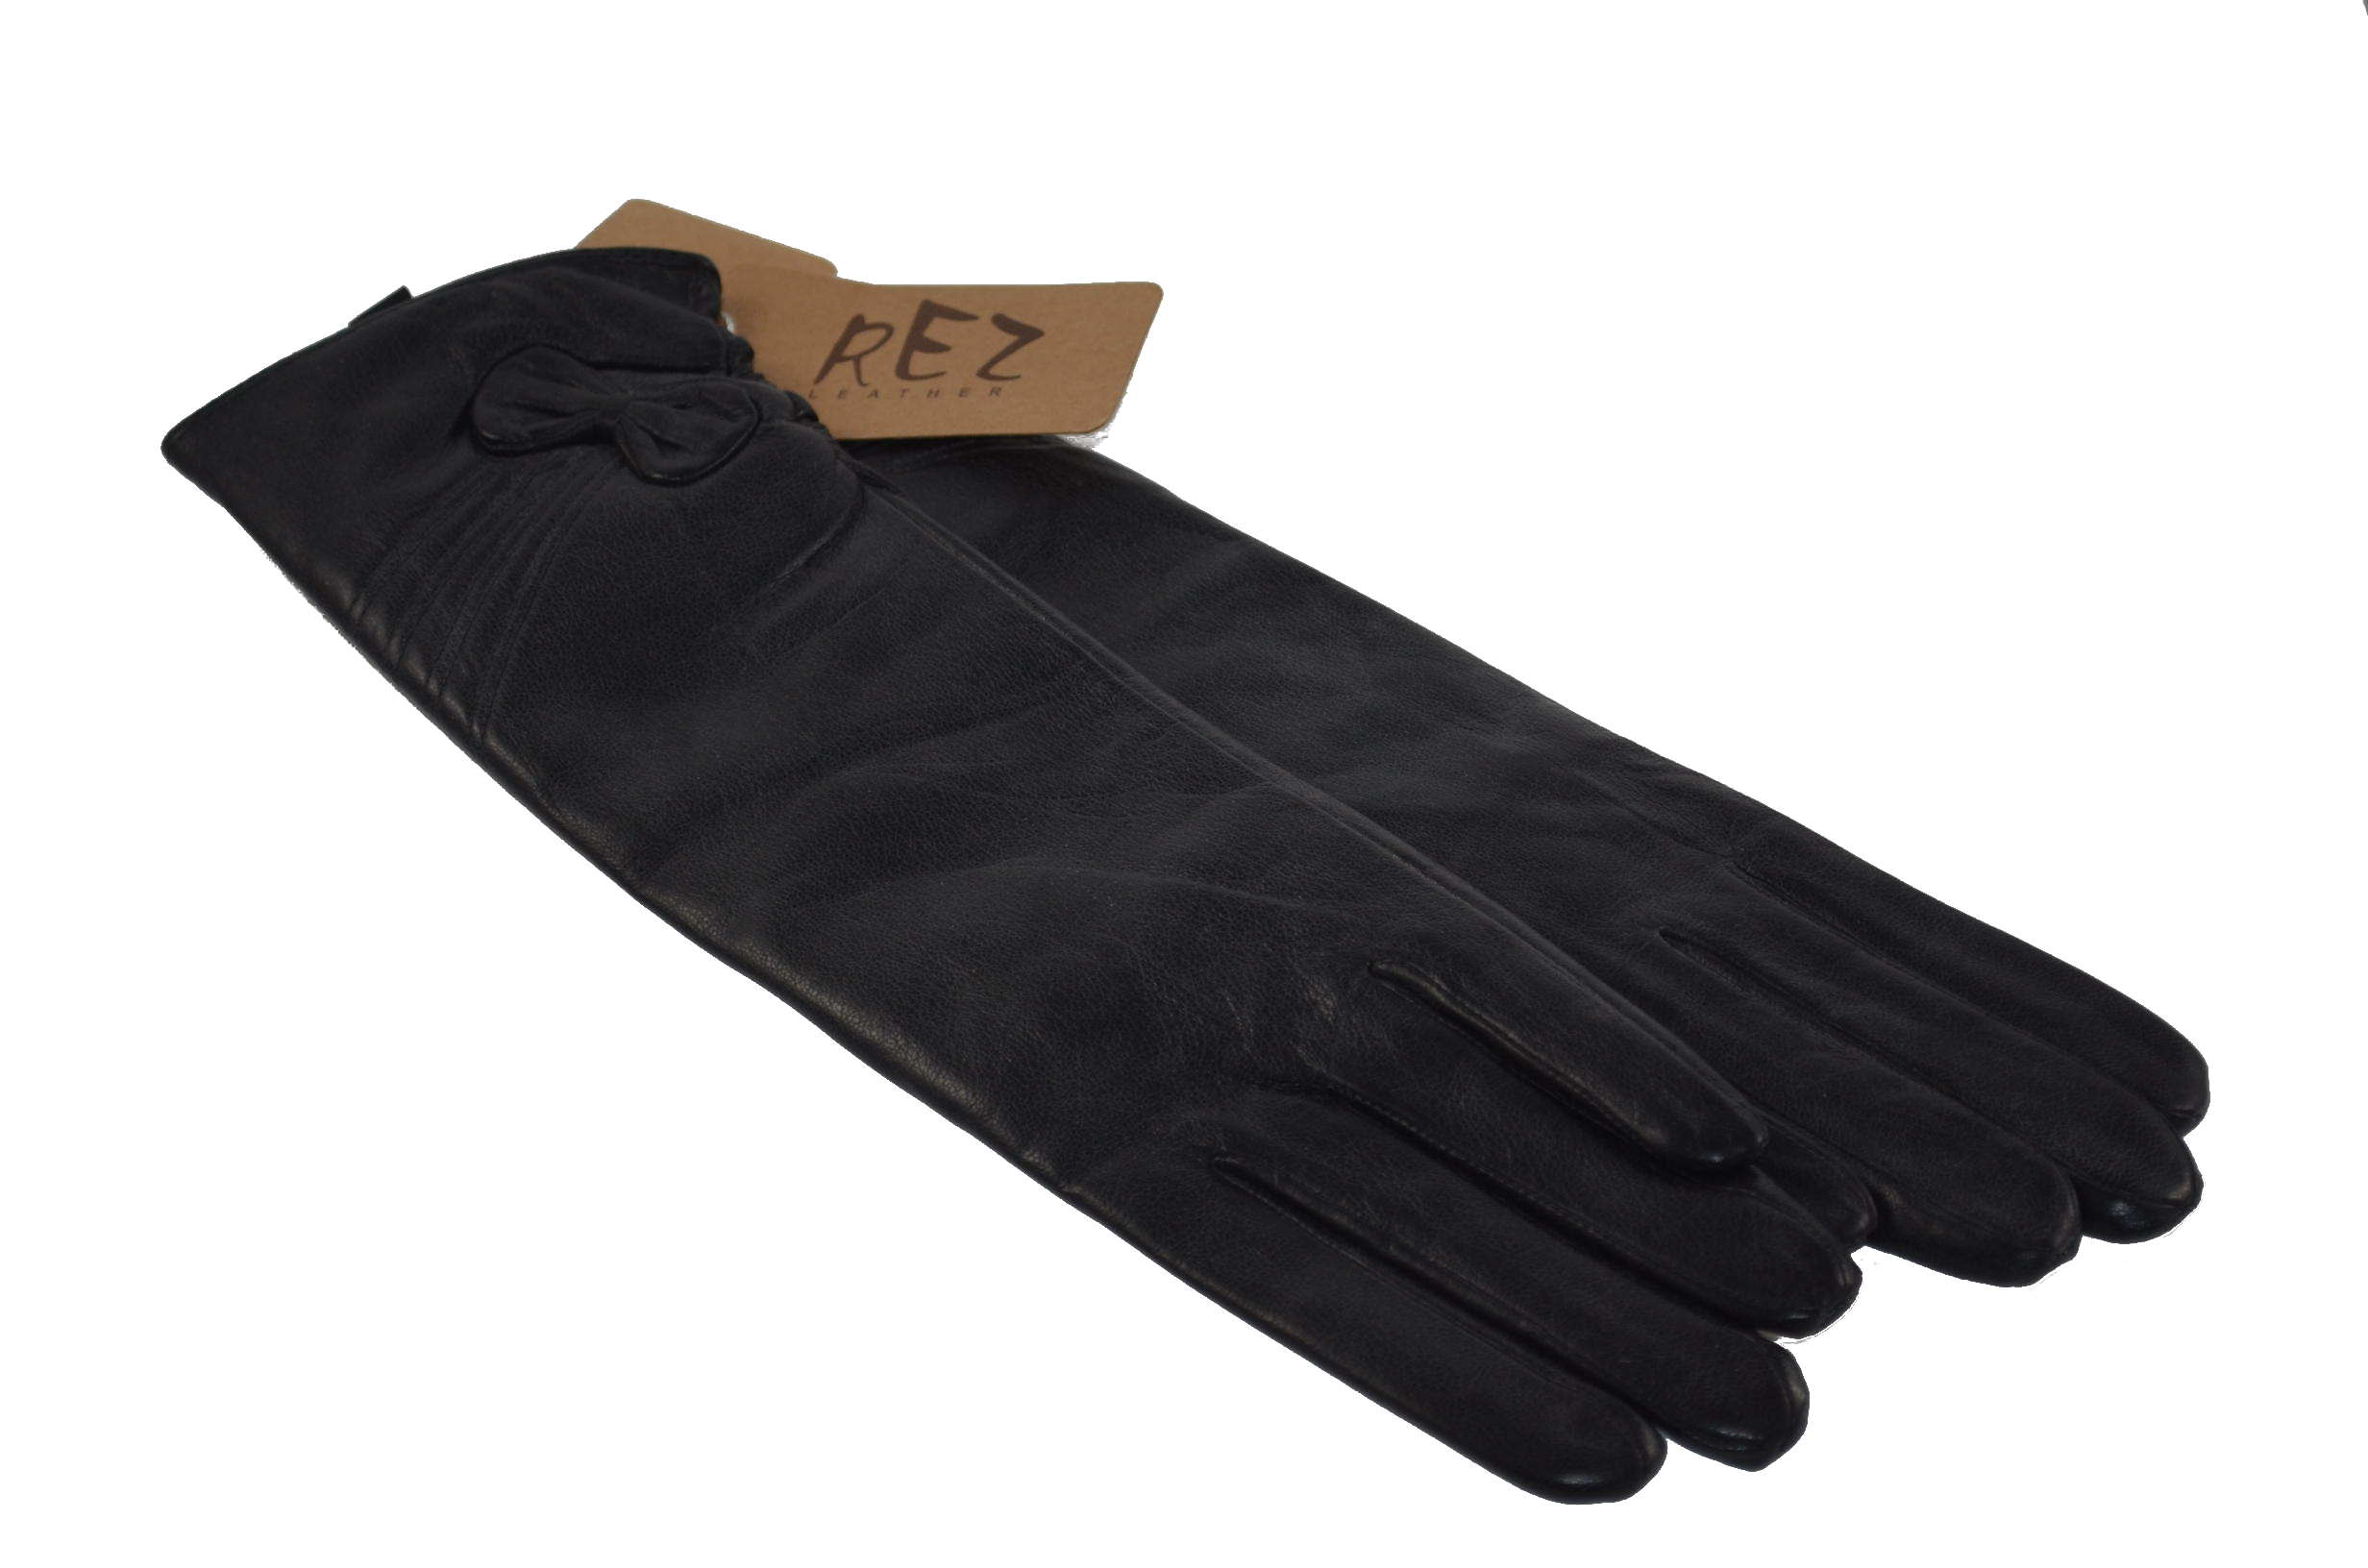 Long gloves for women in genuine leather